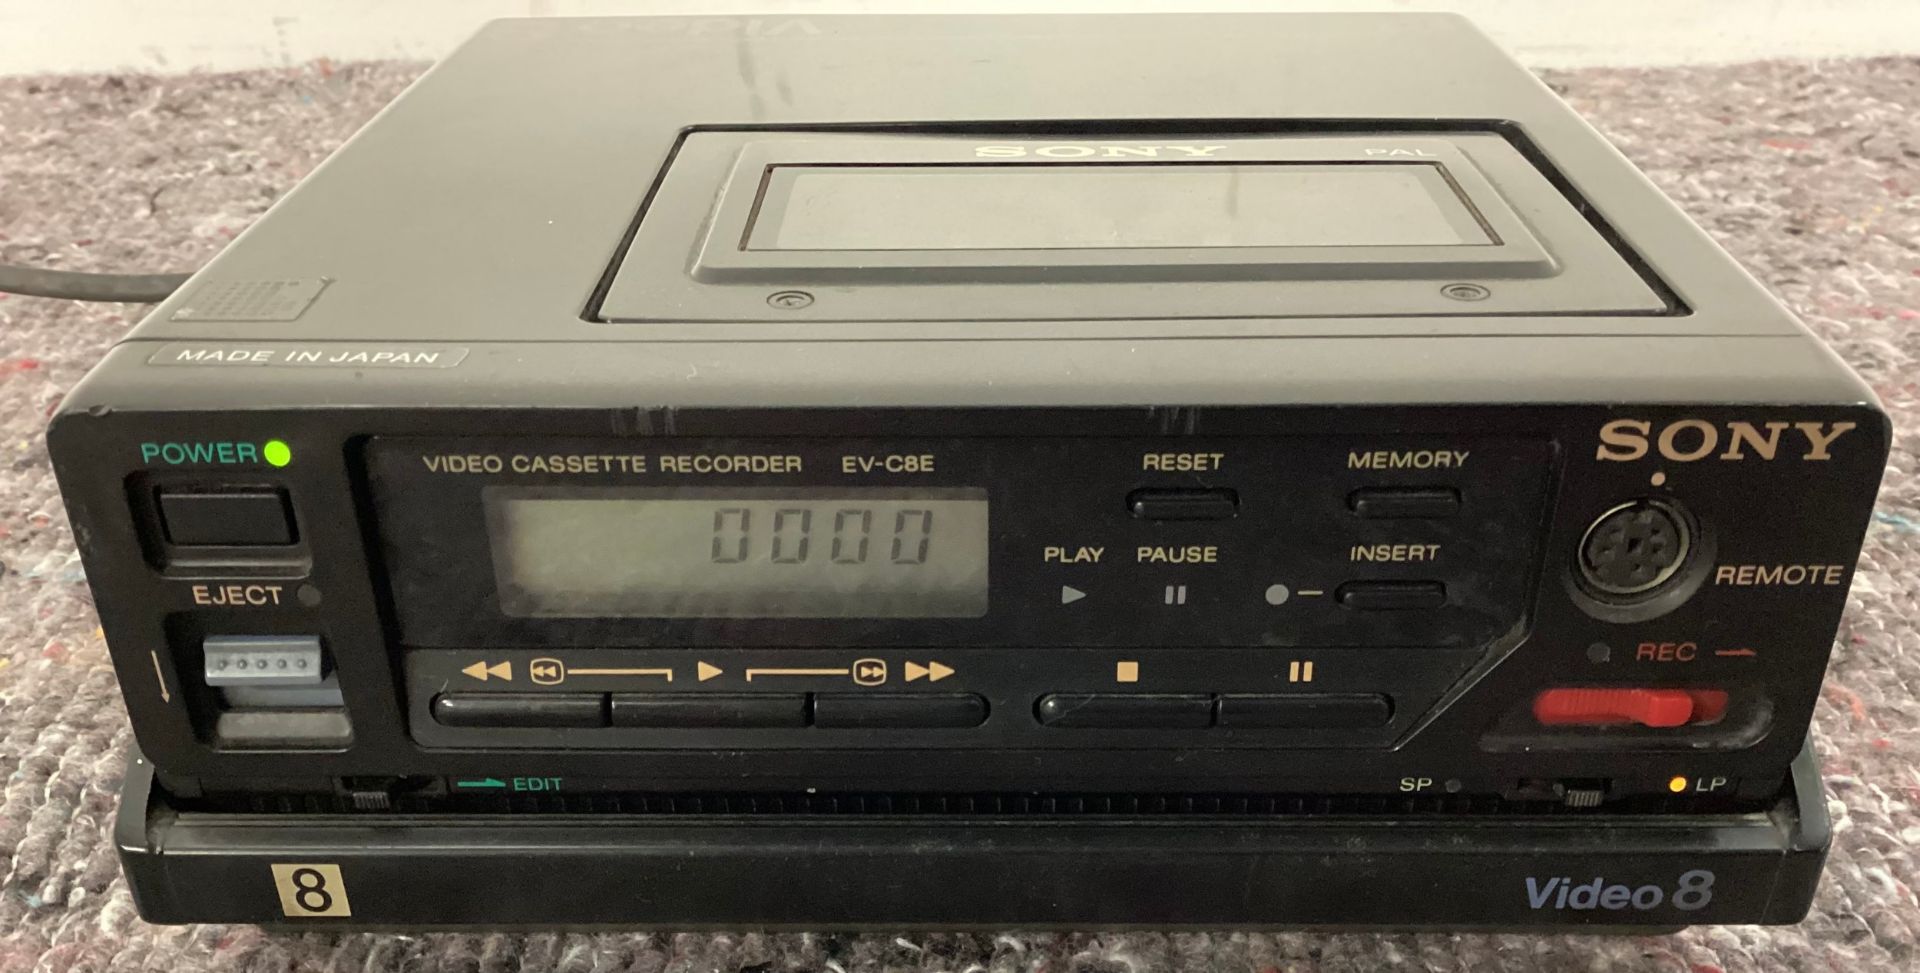 SONY VIDEO 8 TAPE PLAYER. This unit powers up when plugged in and is model No. EV-C8E.